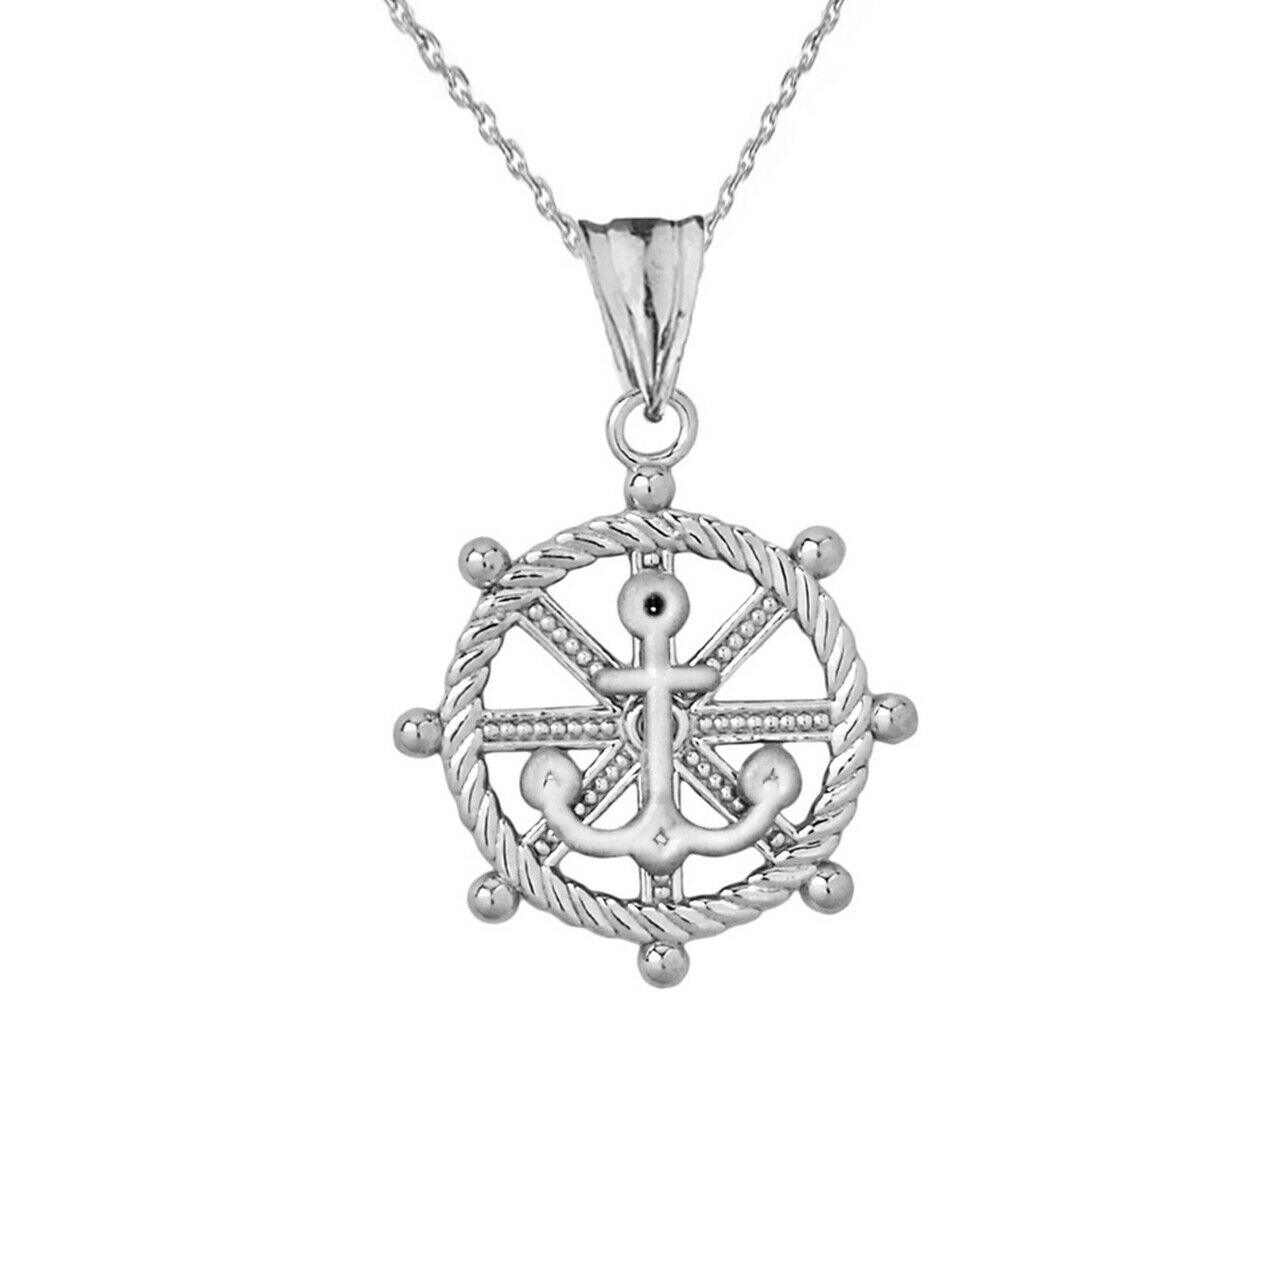 .925 Sterling Silver Anchor with Roped Helm Pendant Necklace